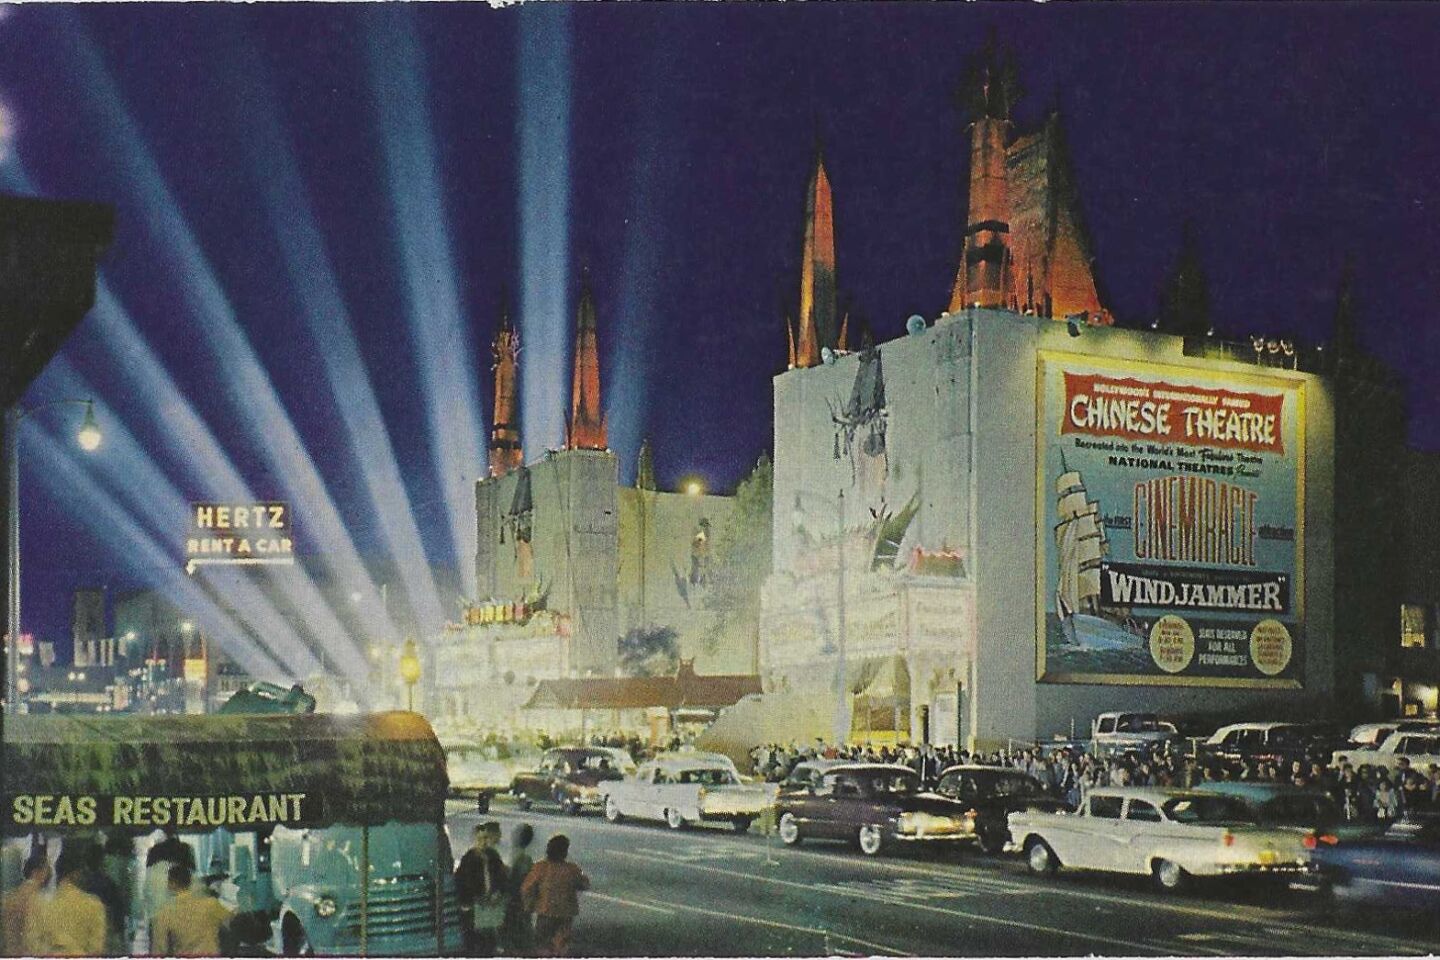 Chinese Theatre on a vintage postcard